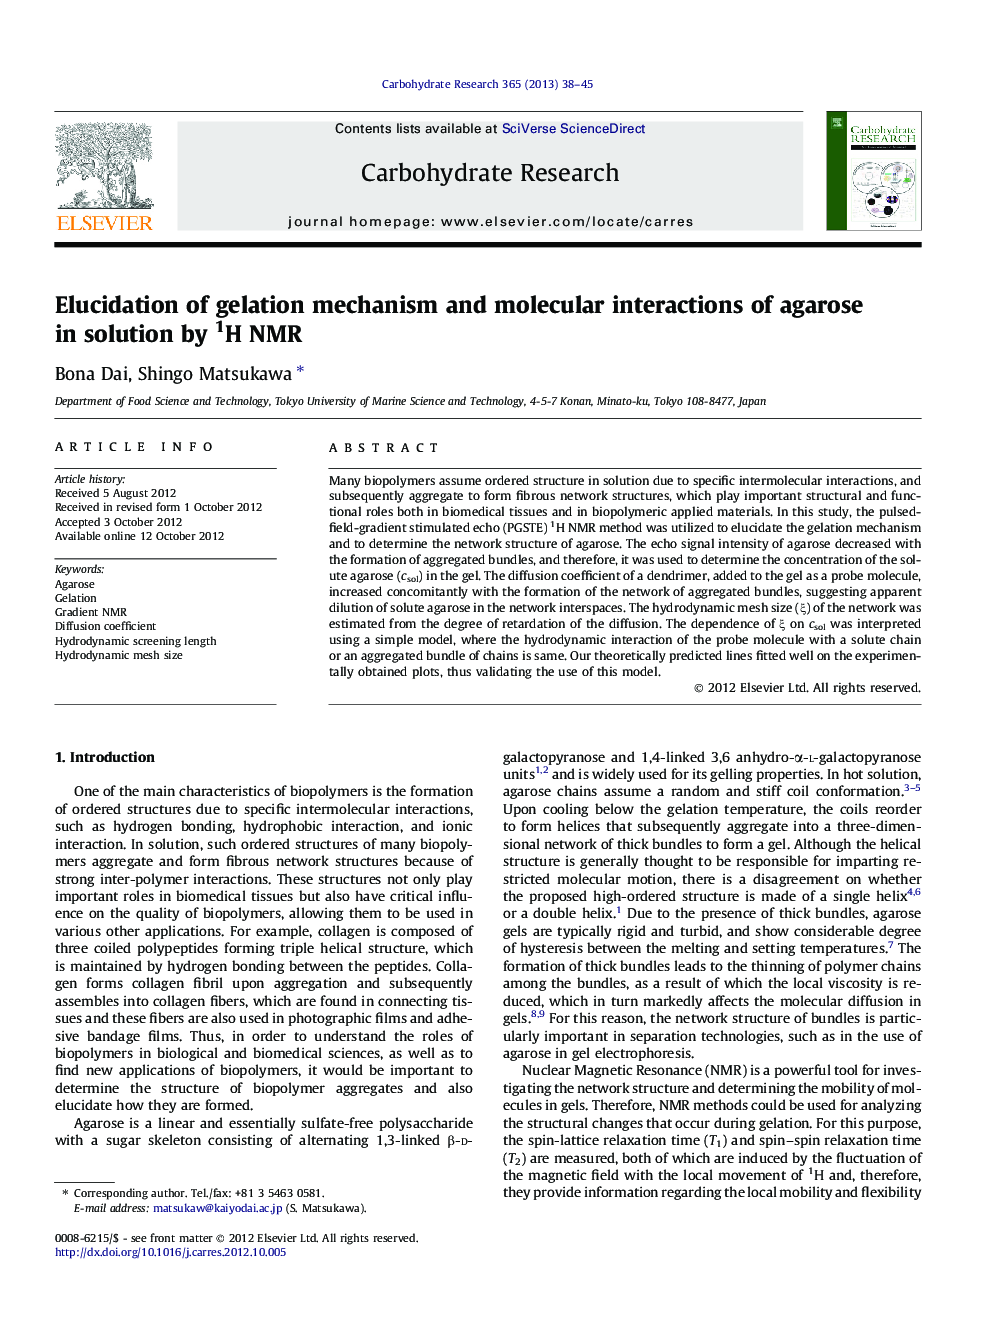 Elucidation of gelation mechanism and molecular interactions of agarose in solution by 1H NMR